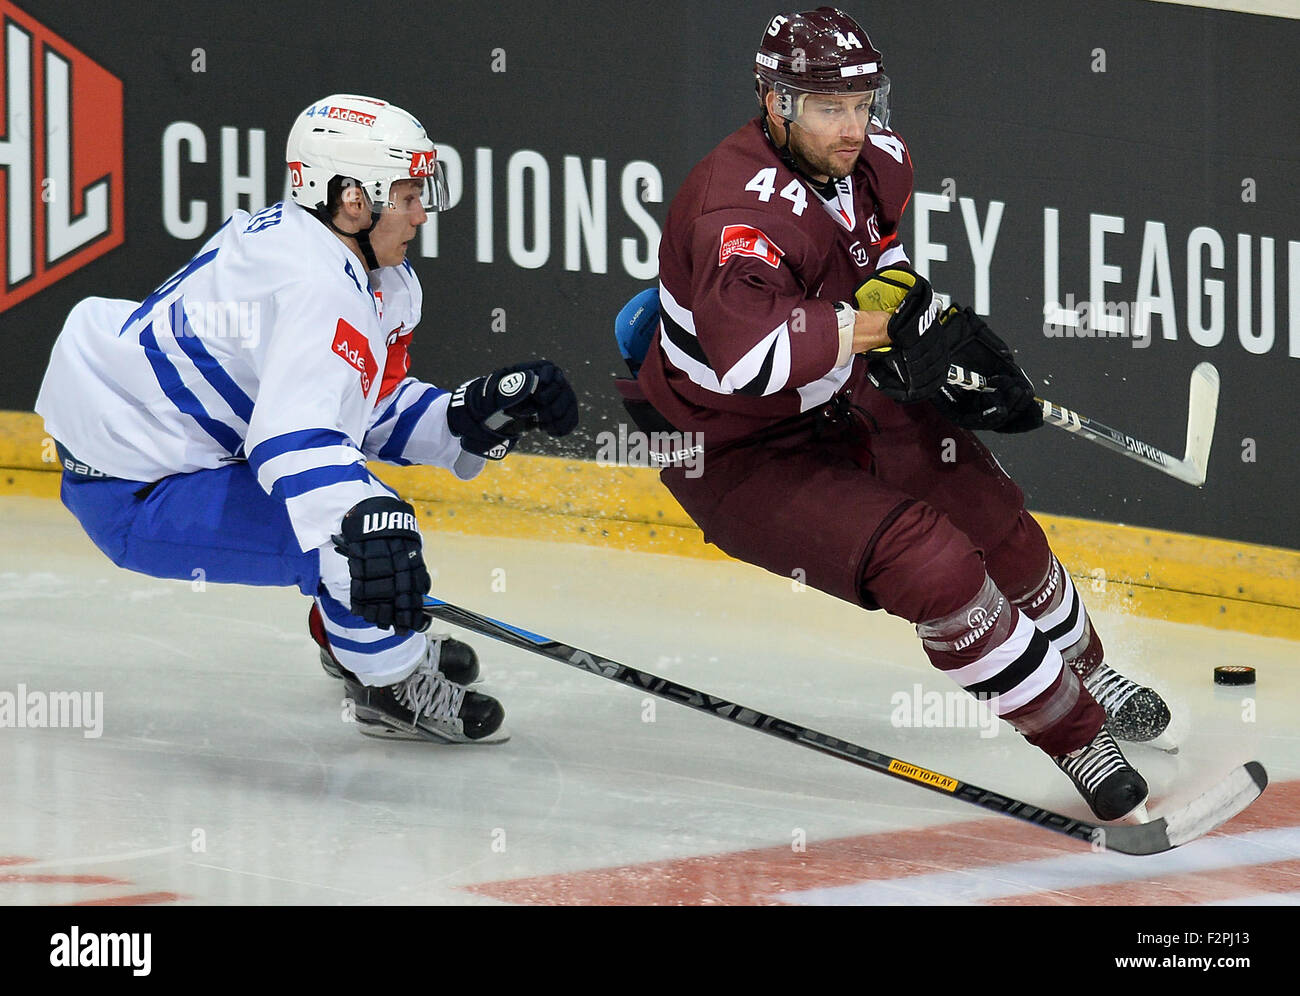 Prague, Czech Republic. 22nd Sep, 2015. From left: Pius Suter of Zurich and Ryan Glenn of Sparta during the ice hockey Champions League, 1st round play off match HC Sparta Praha vs ZSC Zurich Lions in Prague, Czech Republic, September 22, 2015. © Katerina Sulova/CTK Photo/Alamy Live News Stock Photo